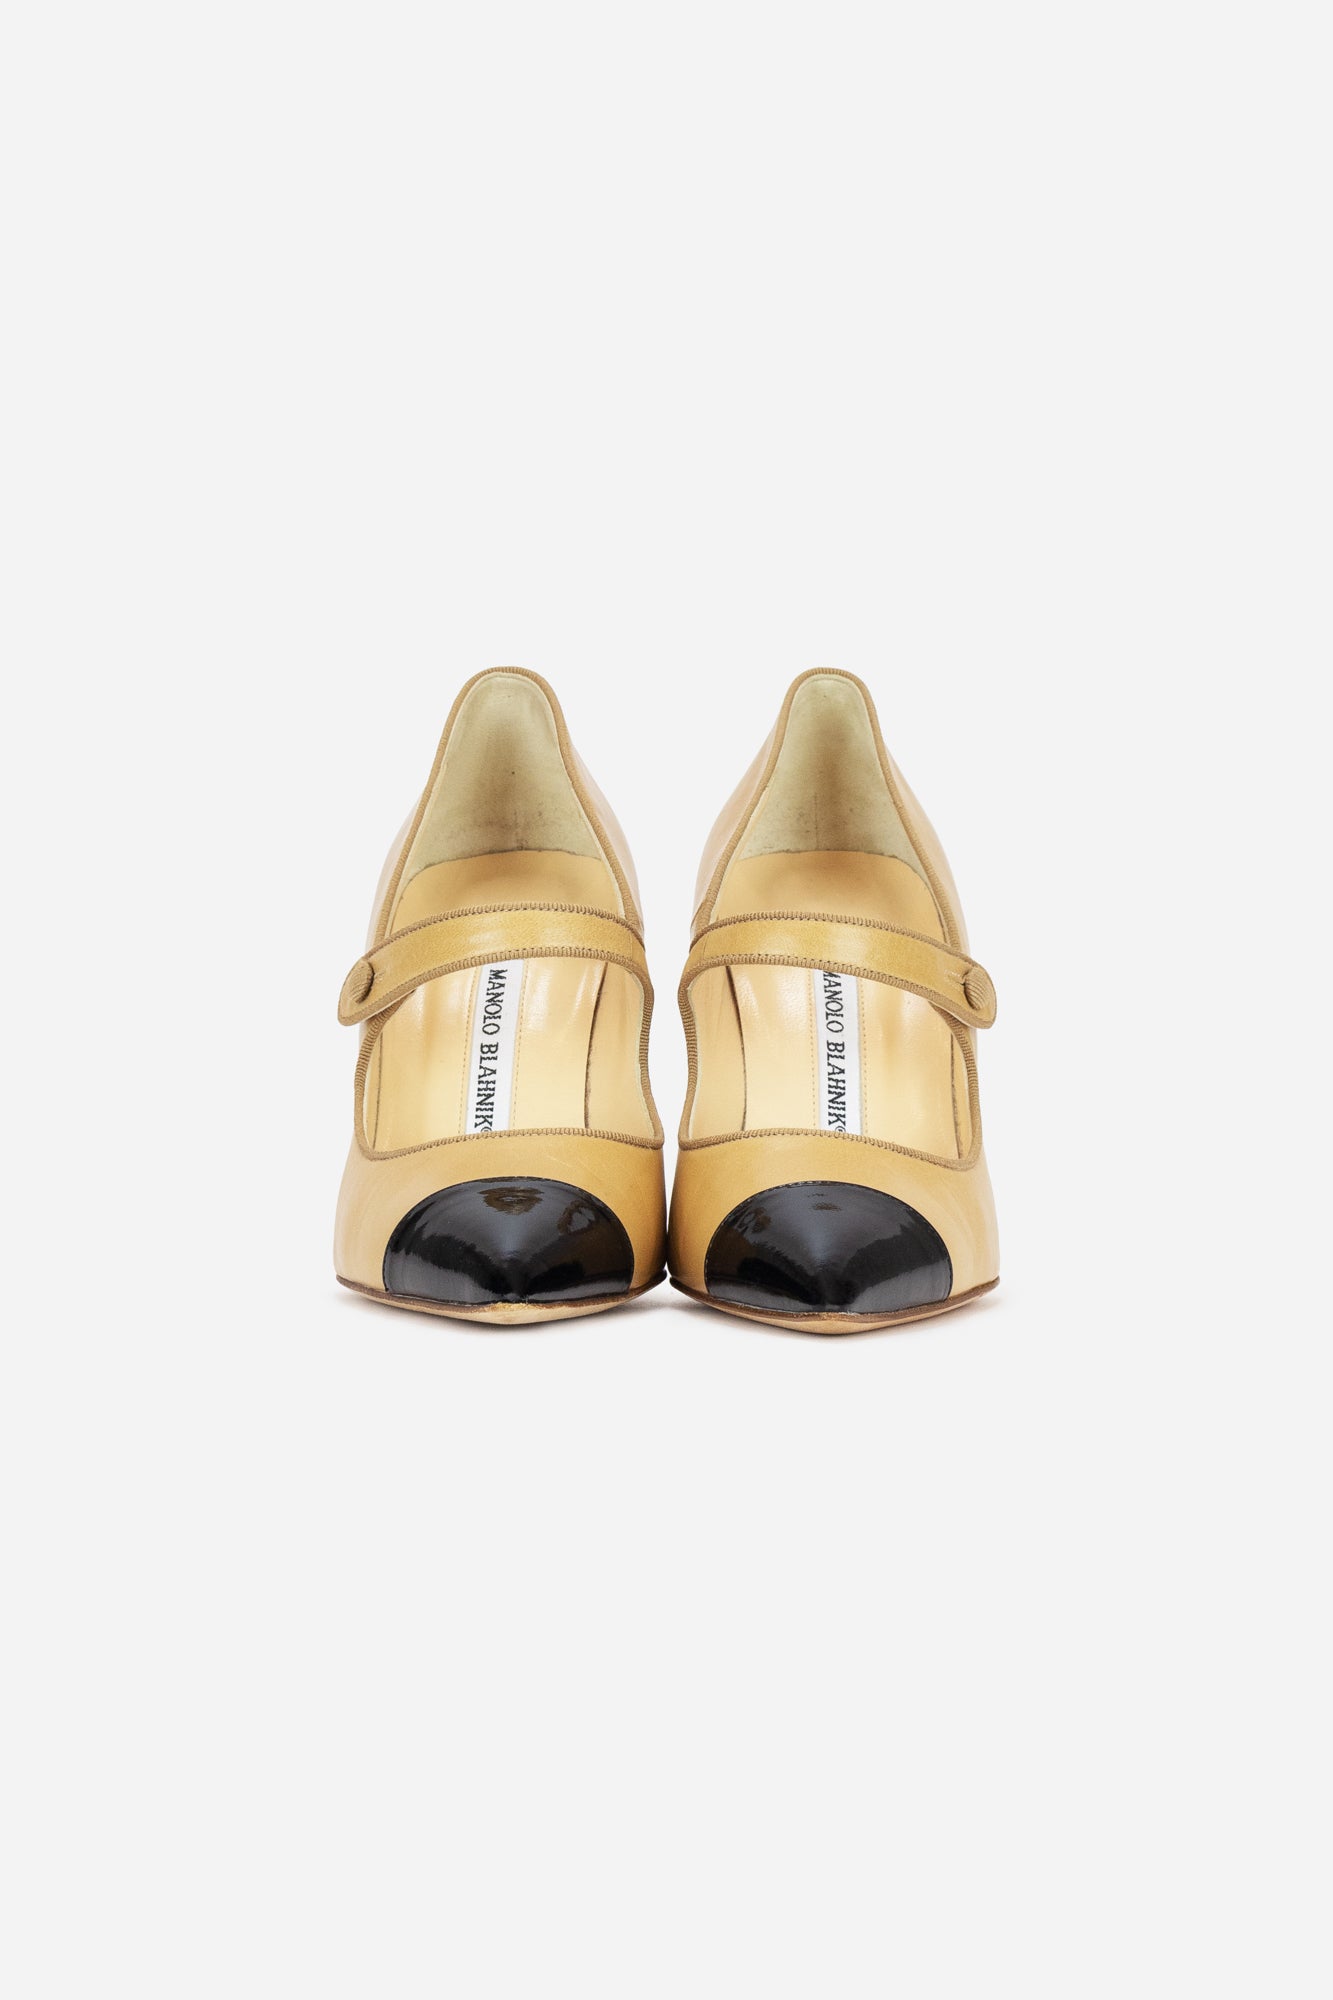 Beige Leather Caparinew Pumps with Black Patent Leather Cap-Toe